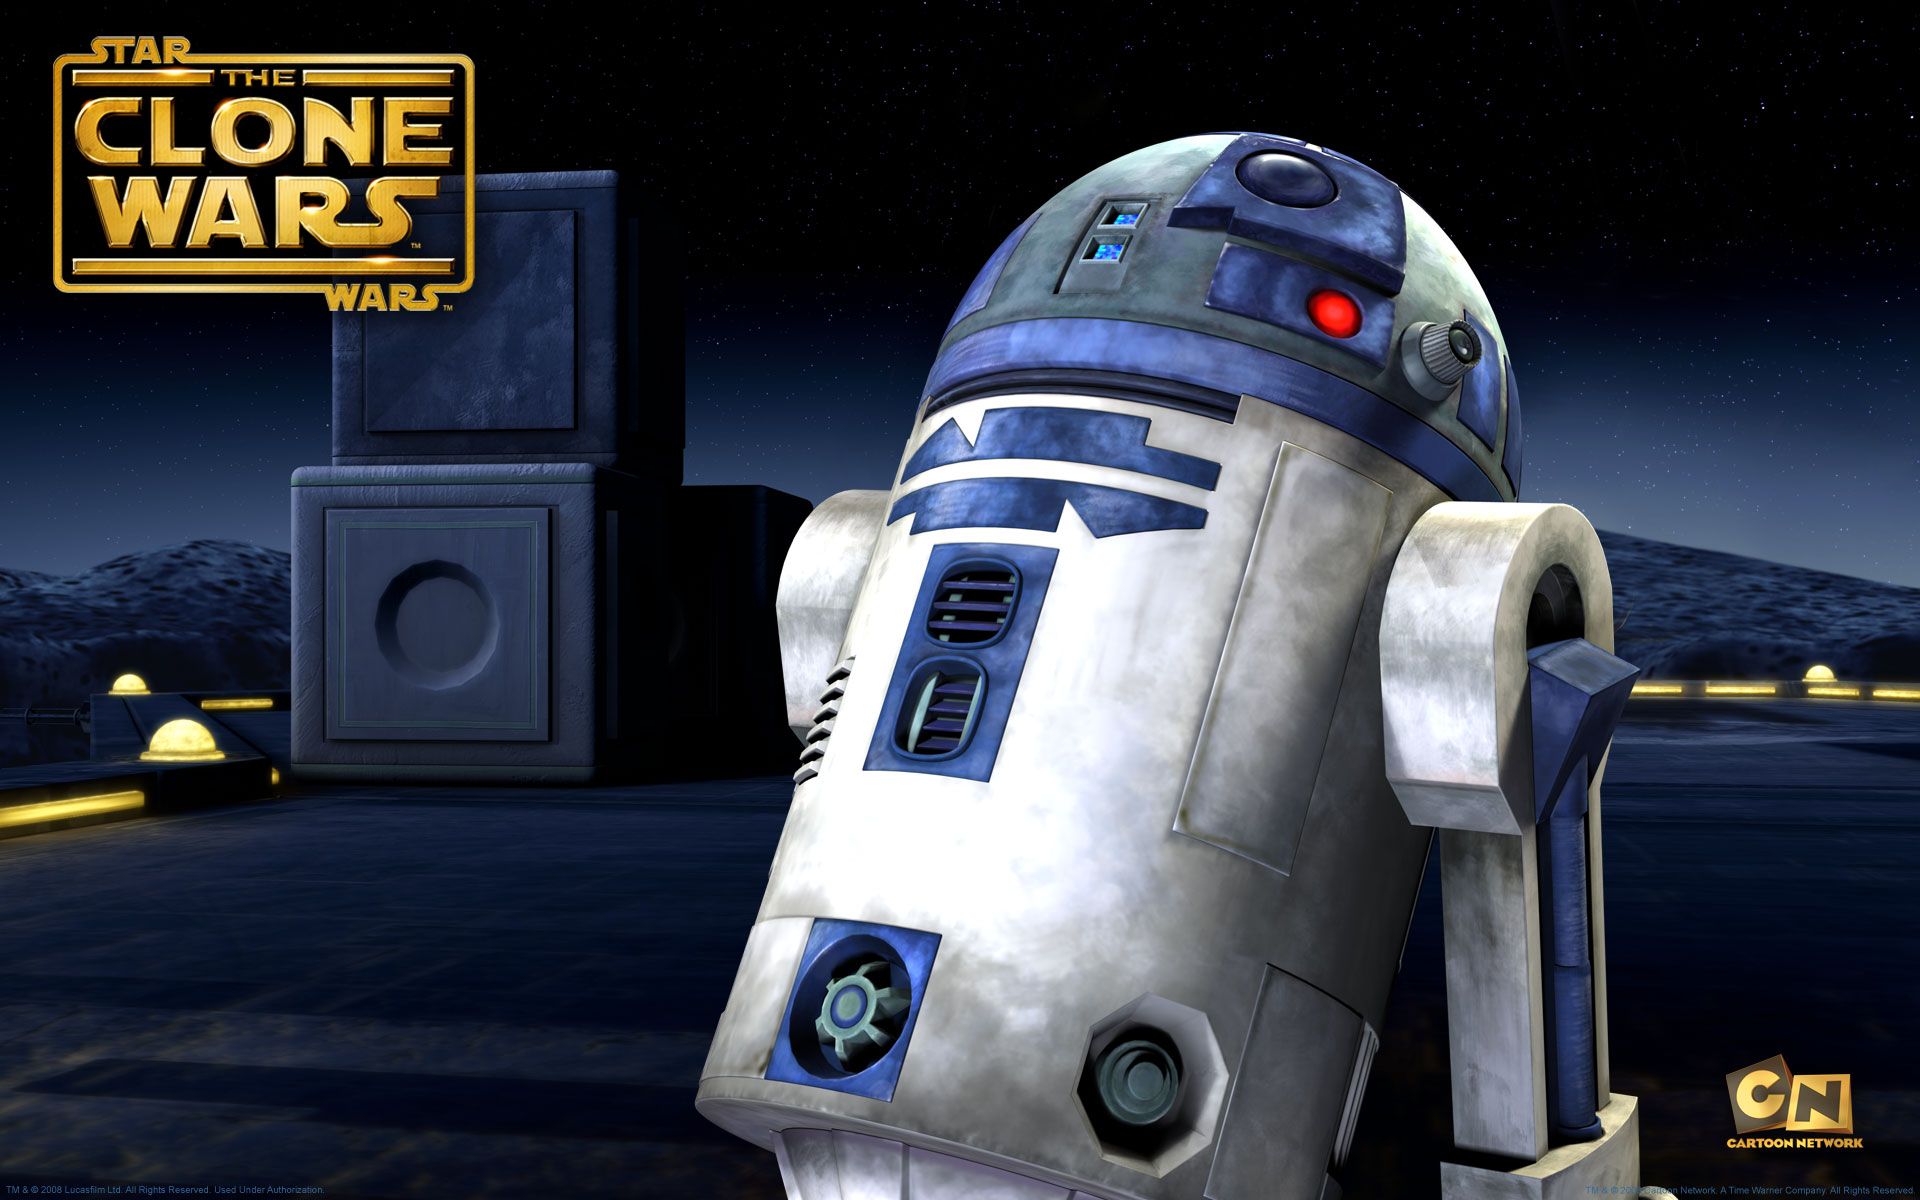 Desktop Wallpaper Picture Of The Droid R2d2 From The Star